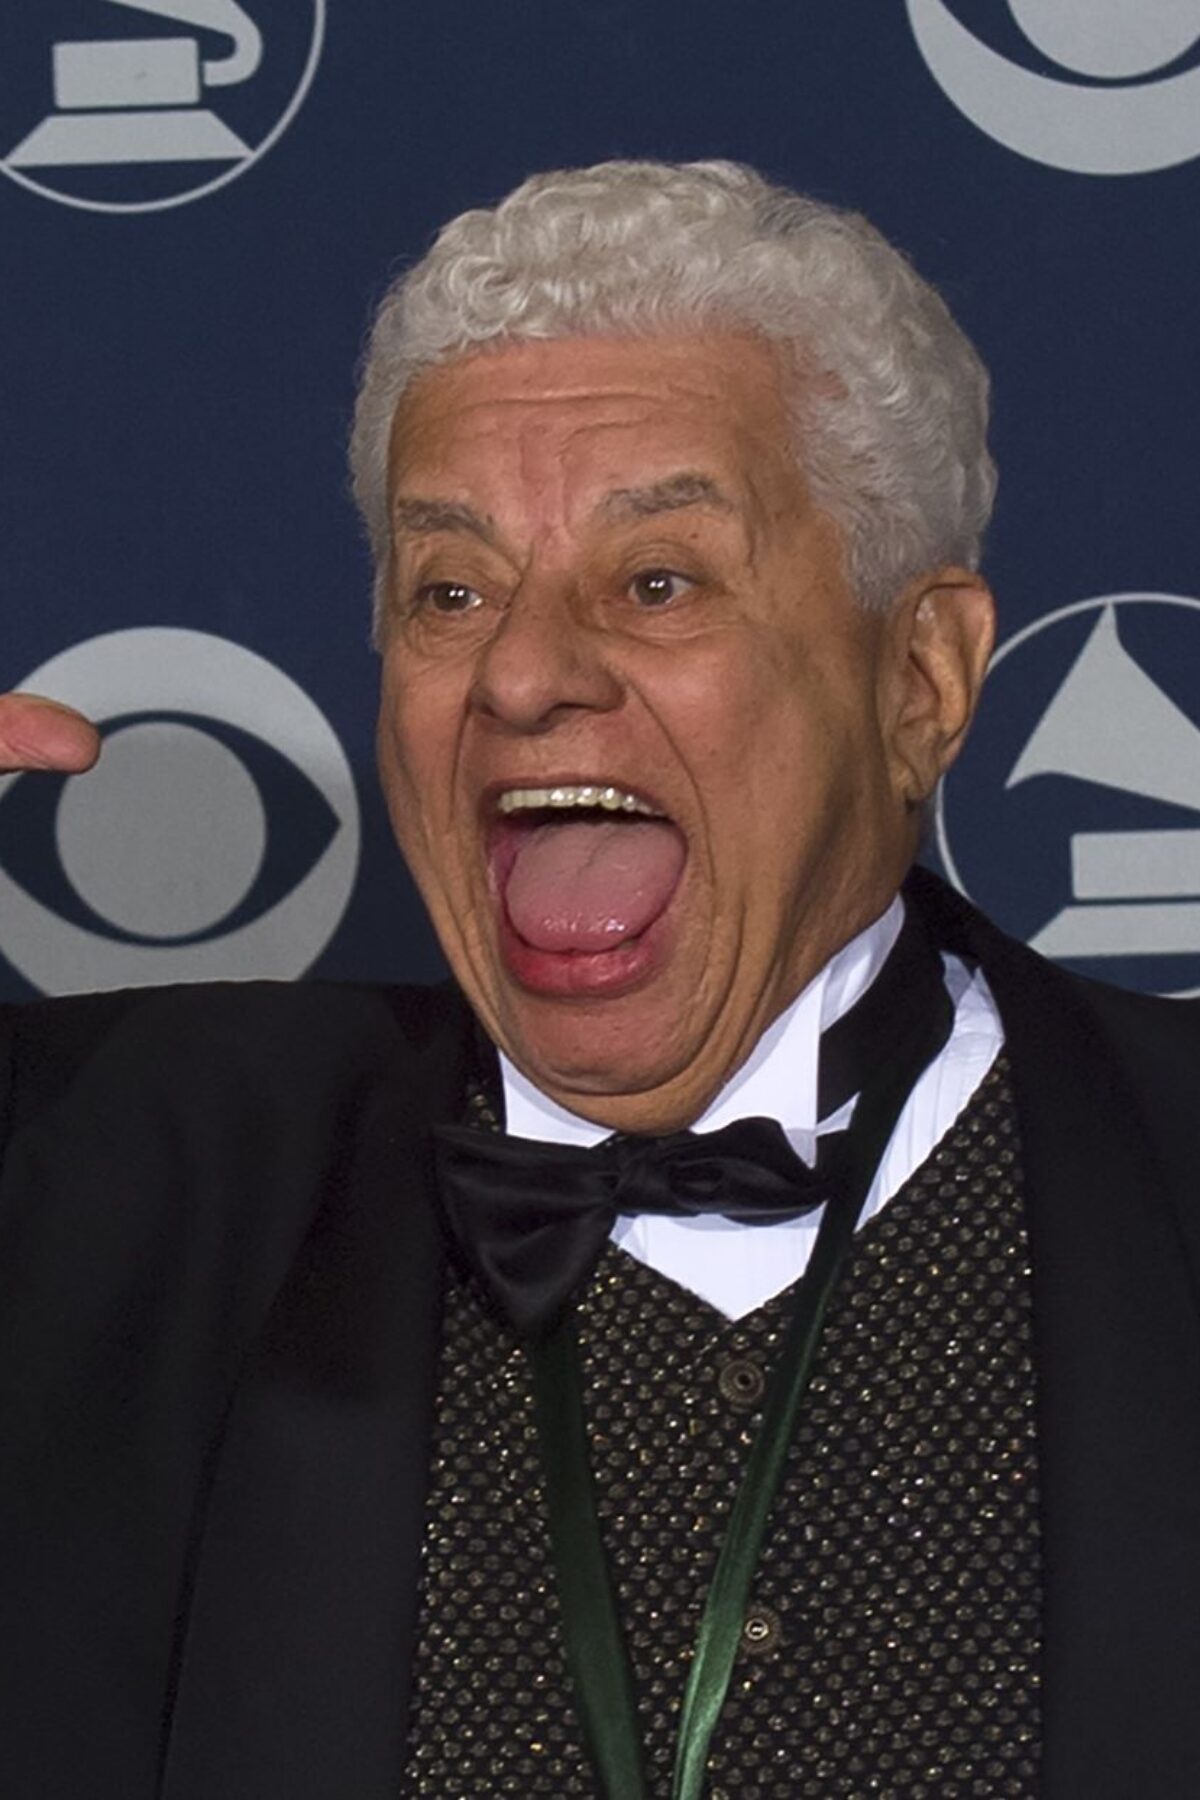 LOS ANGELES, CALIFORNIA - FEBRUARY 23 : Grammy Winner Tito Puente backstage at the Grammy Awards Show, February 23, 2000 in Los Angeles, California. (Photo by Bob Riha, Jr./Getty Images)